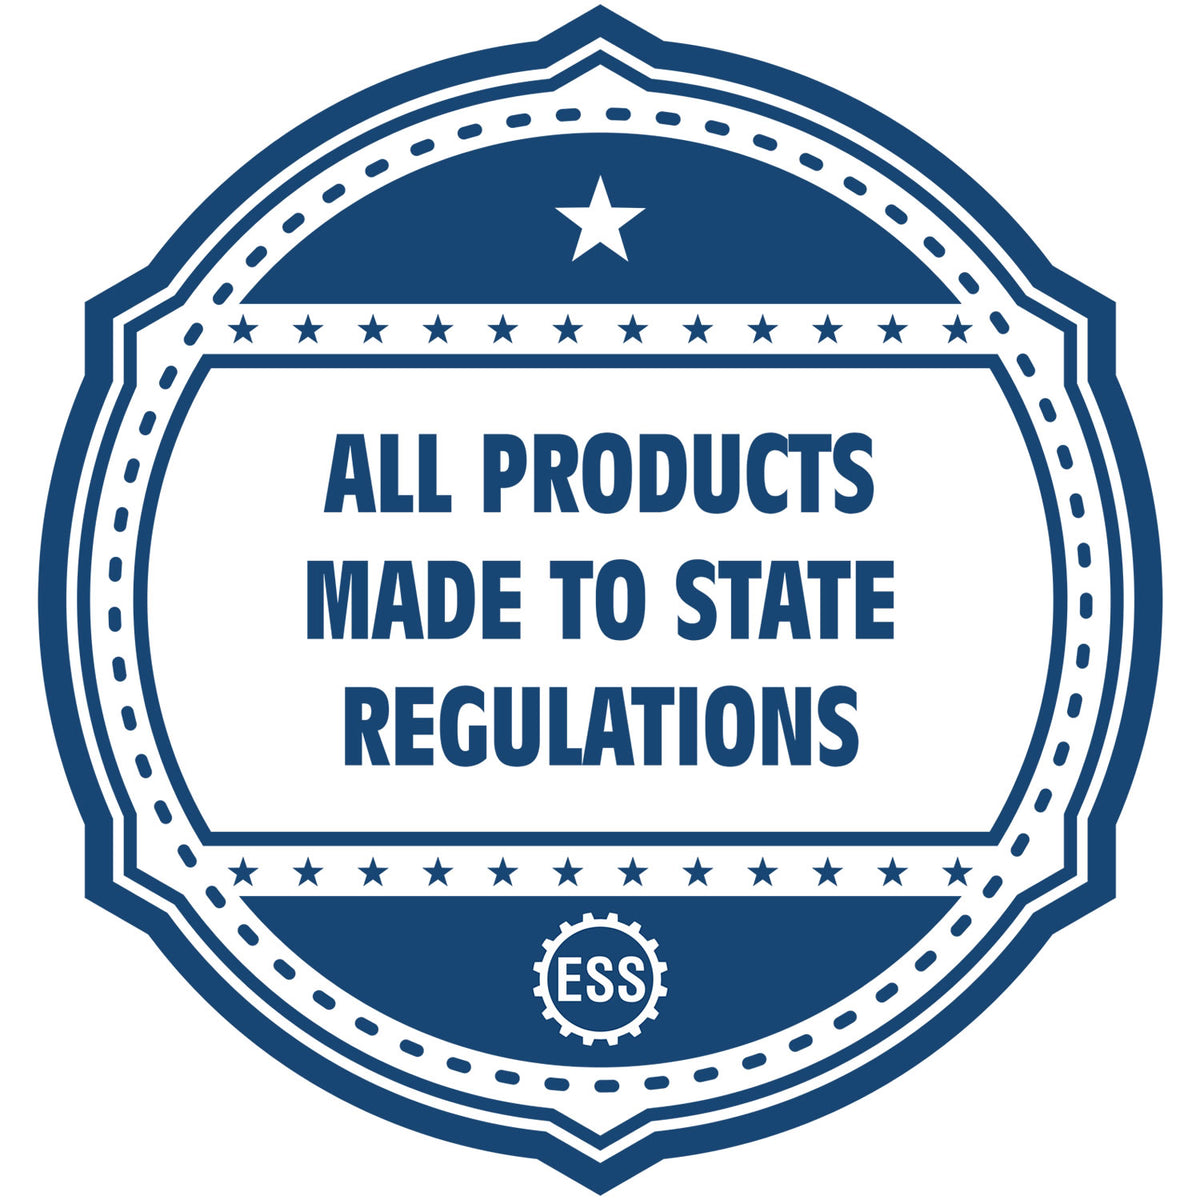 An icon or badge element for the Slim Pre-Inked Vermont Landscape Architect Seal Stamp showing that this product is made in compliance with state regulations.